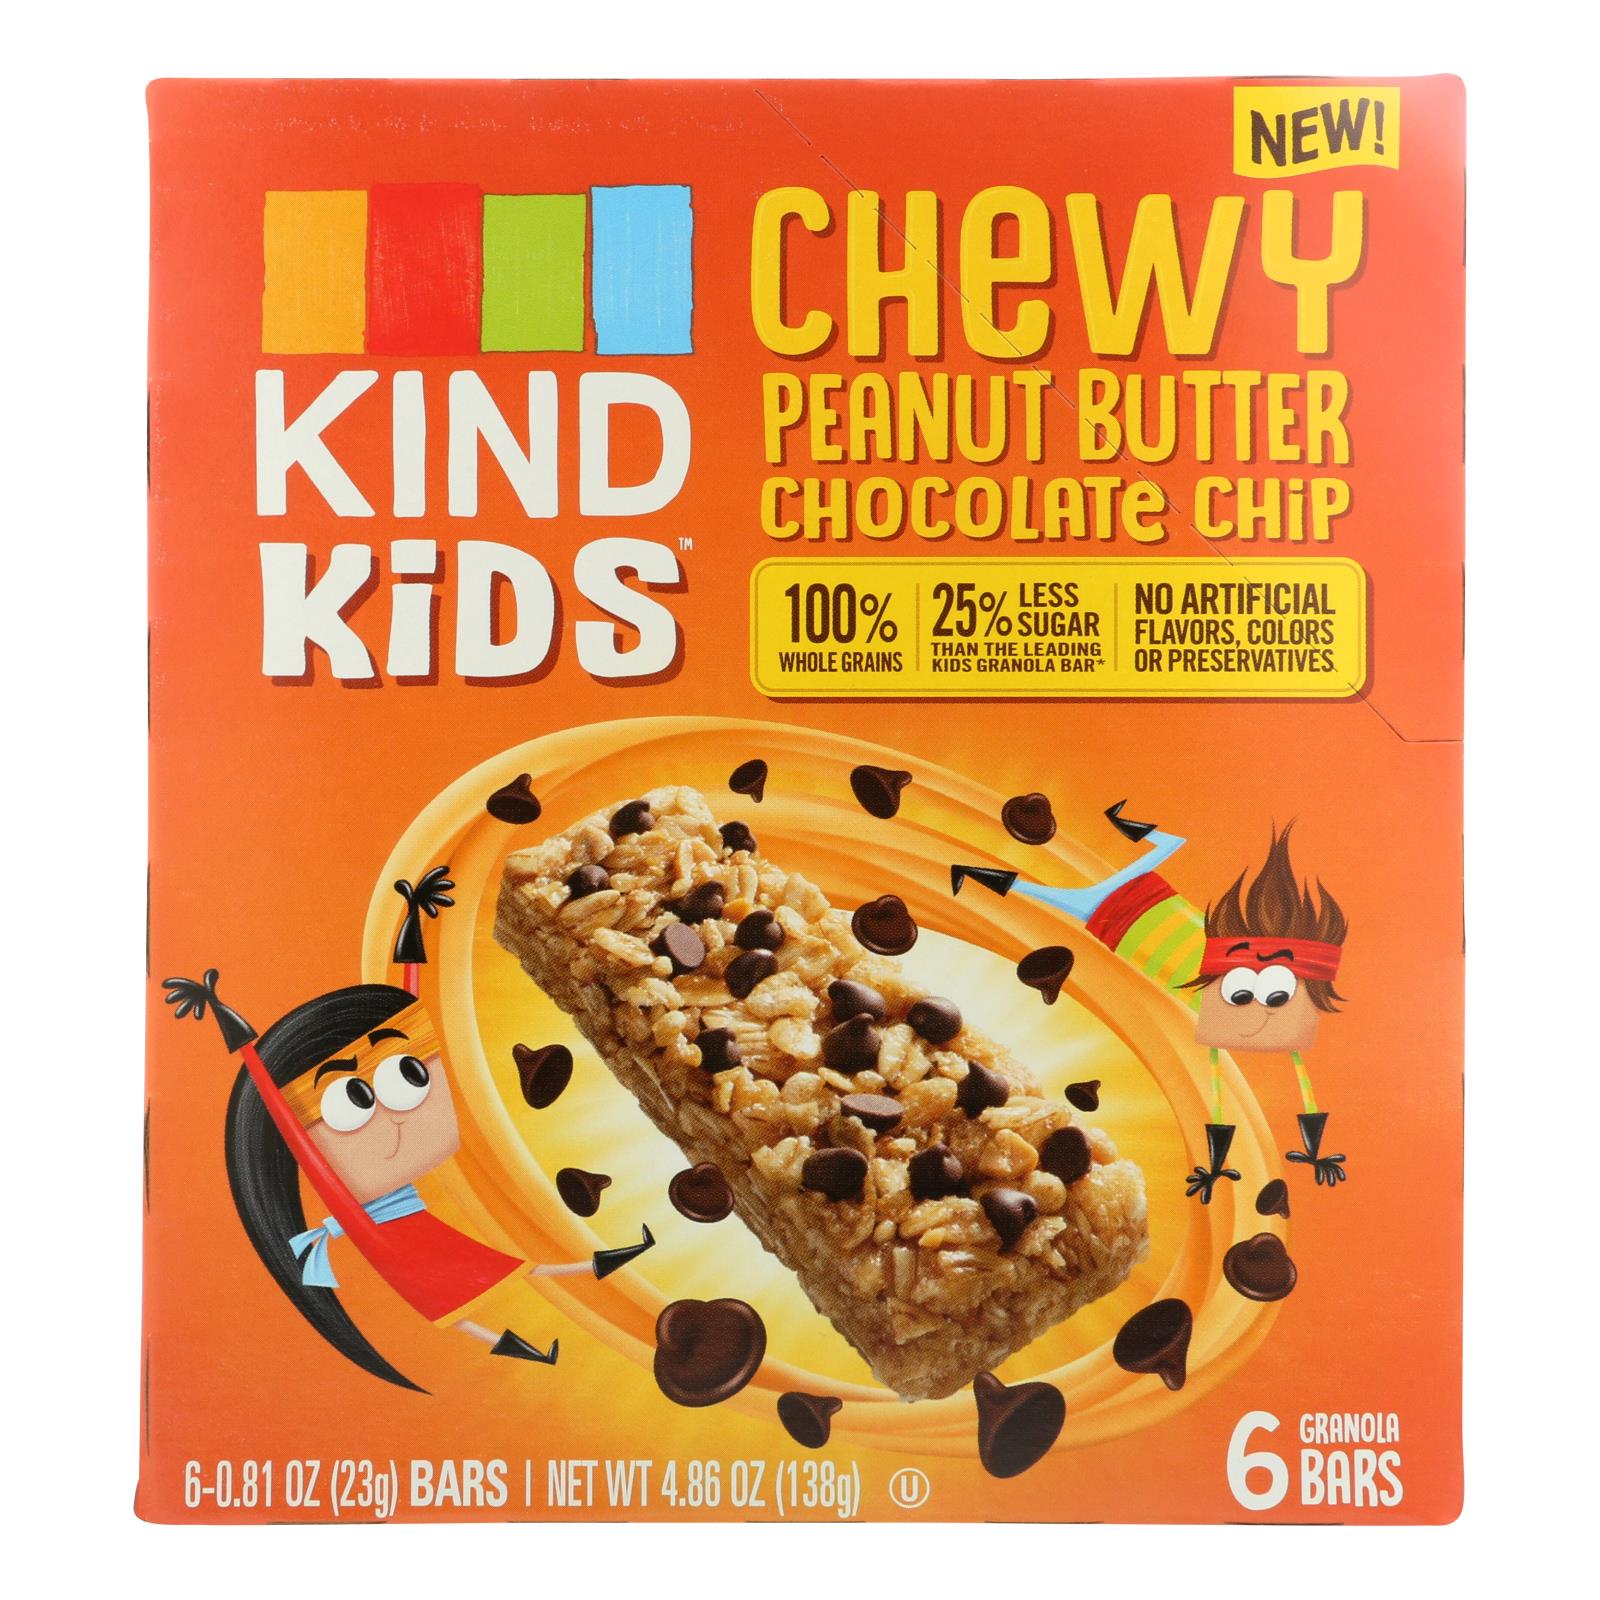 Kind - Bar Chewy Peanut Butter Chocolate Chip - 8개 묶음상품 - 6/.81 OZ